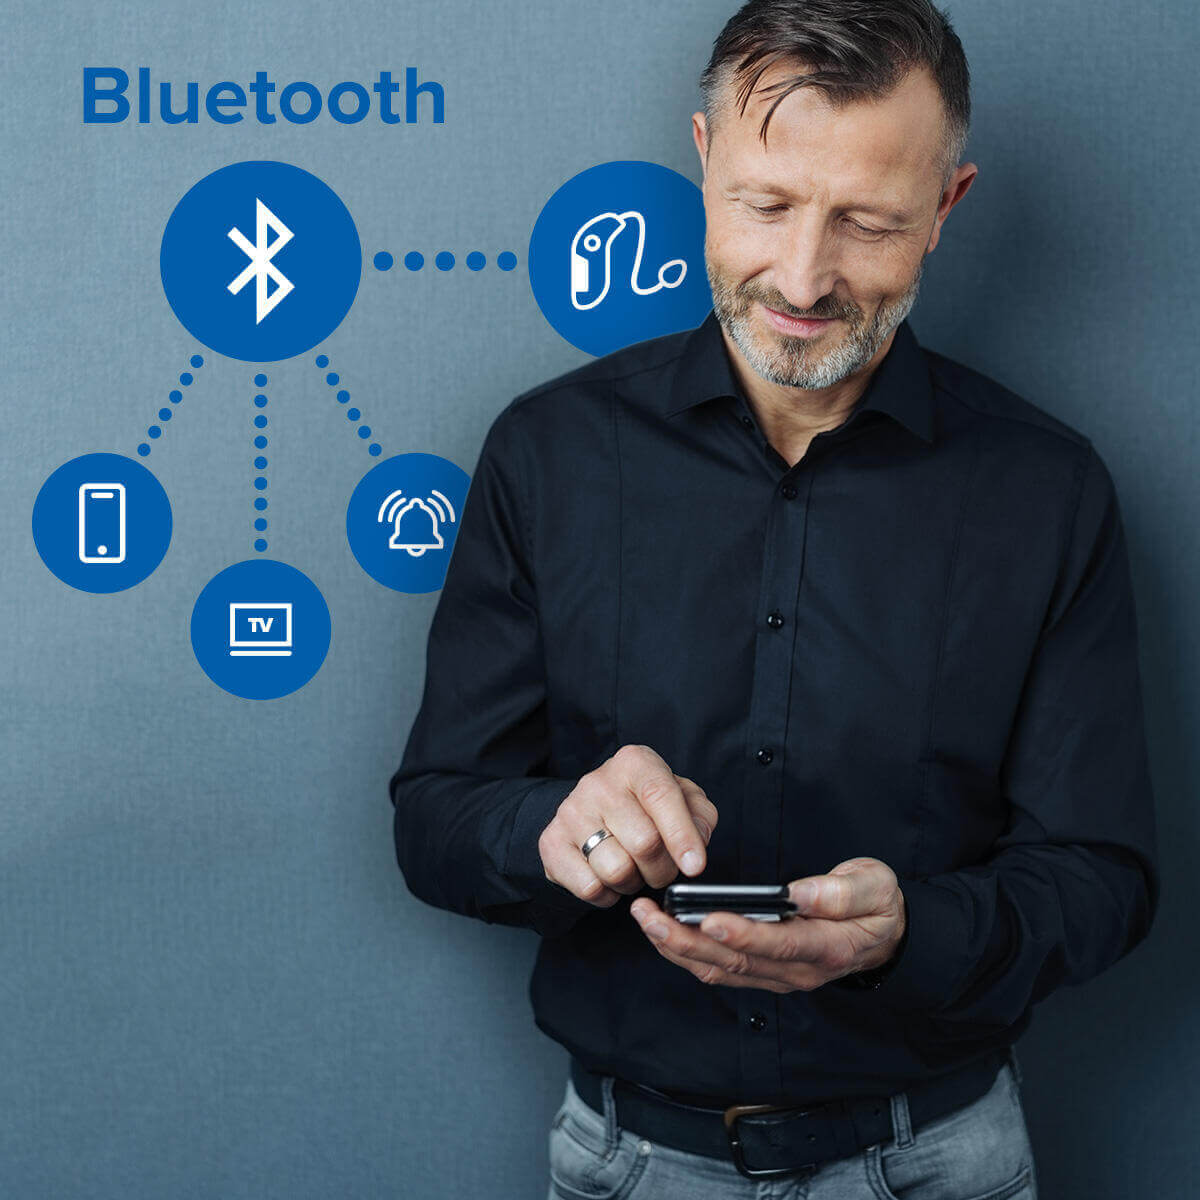 Man using Bluetooth hearing aids with his phone.